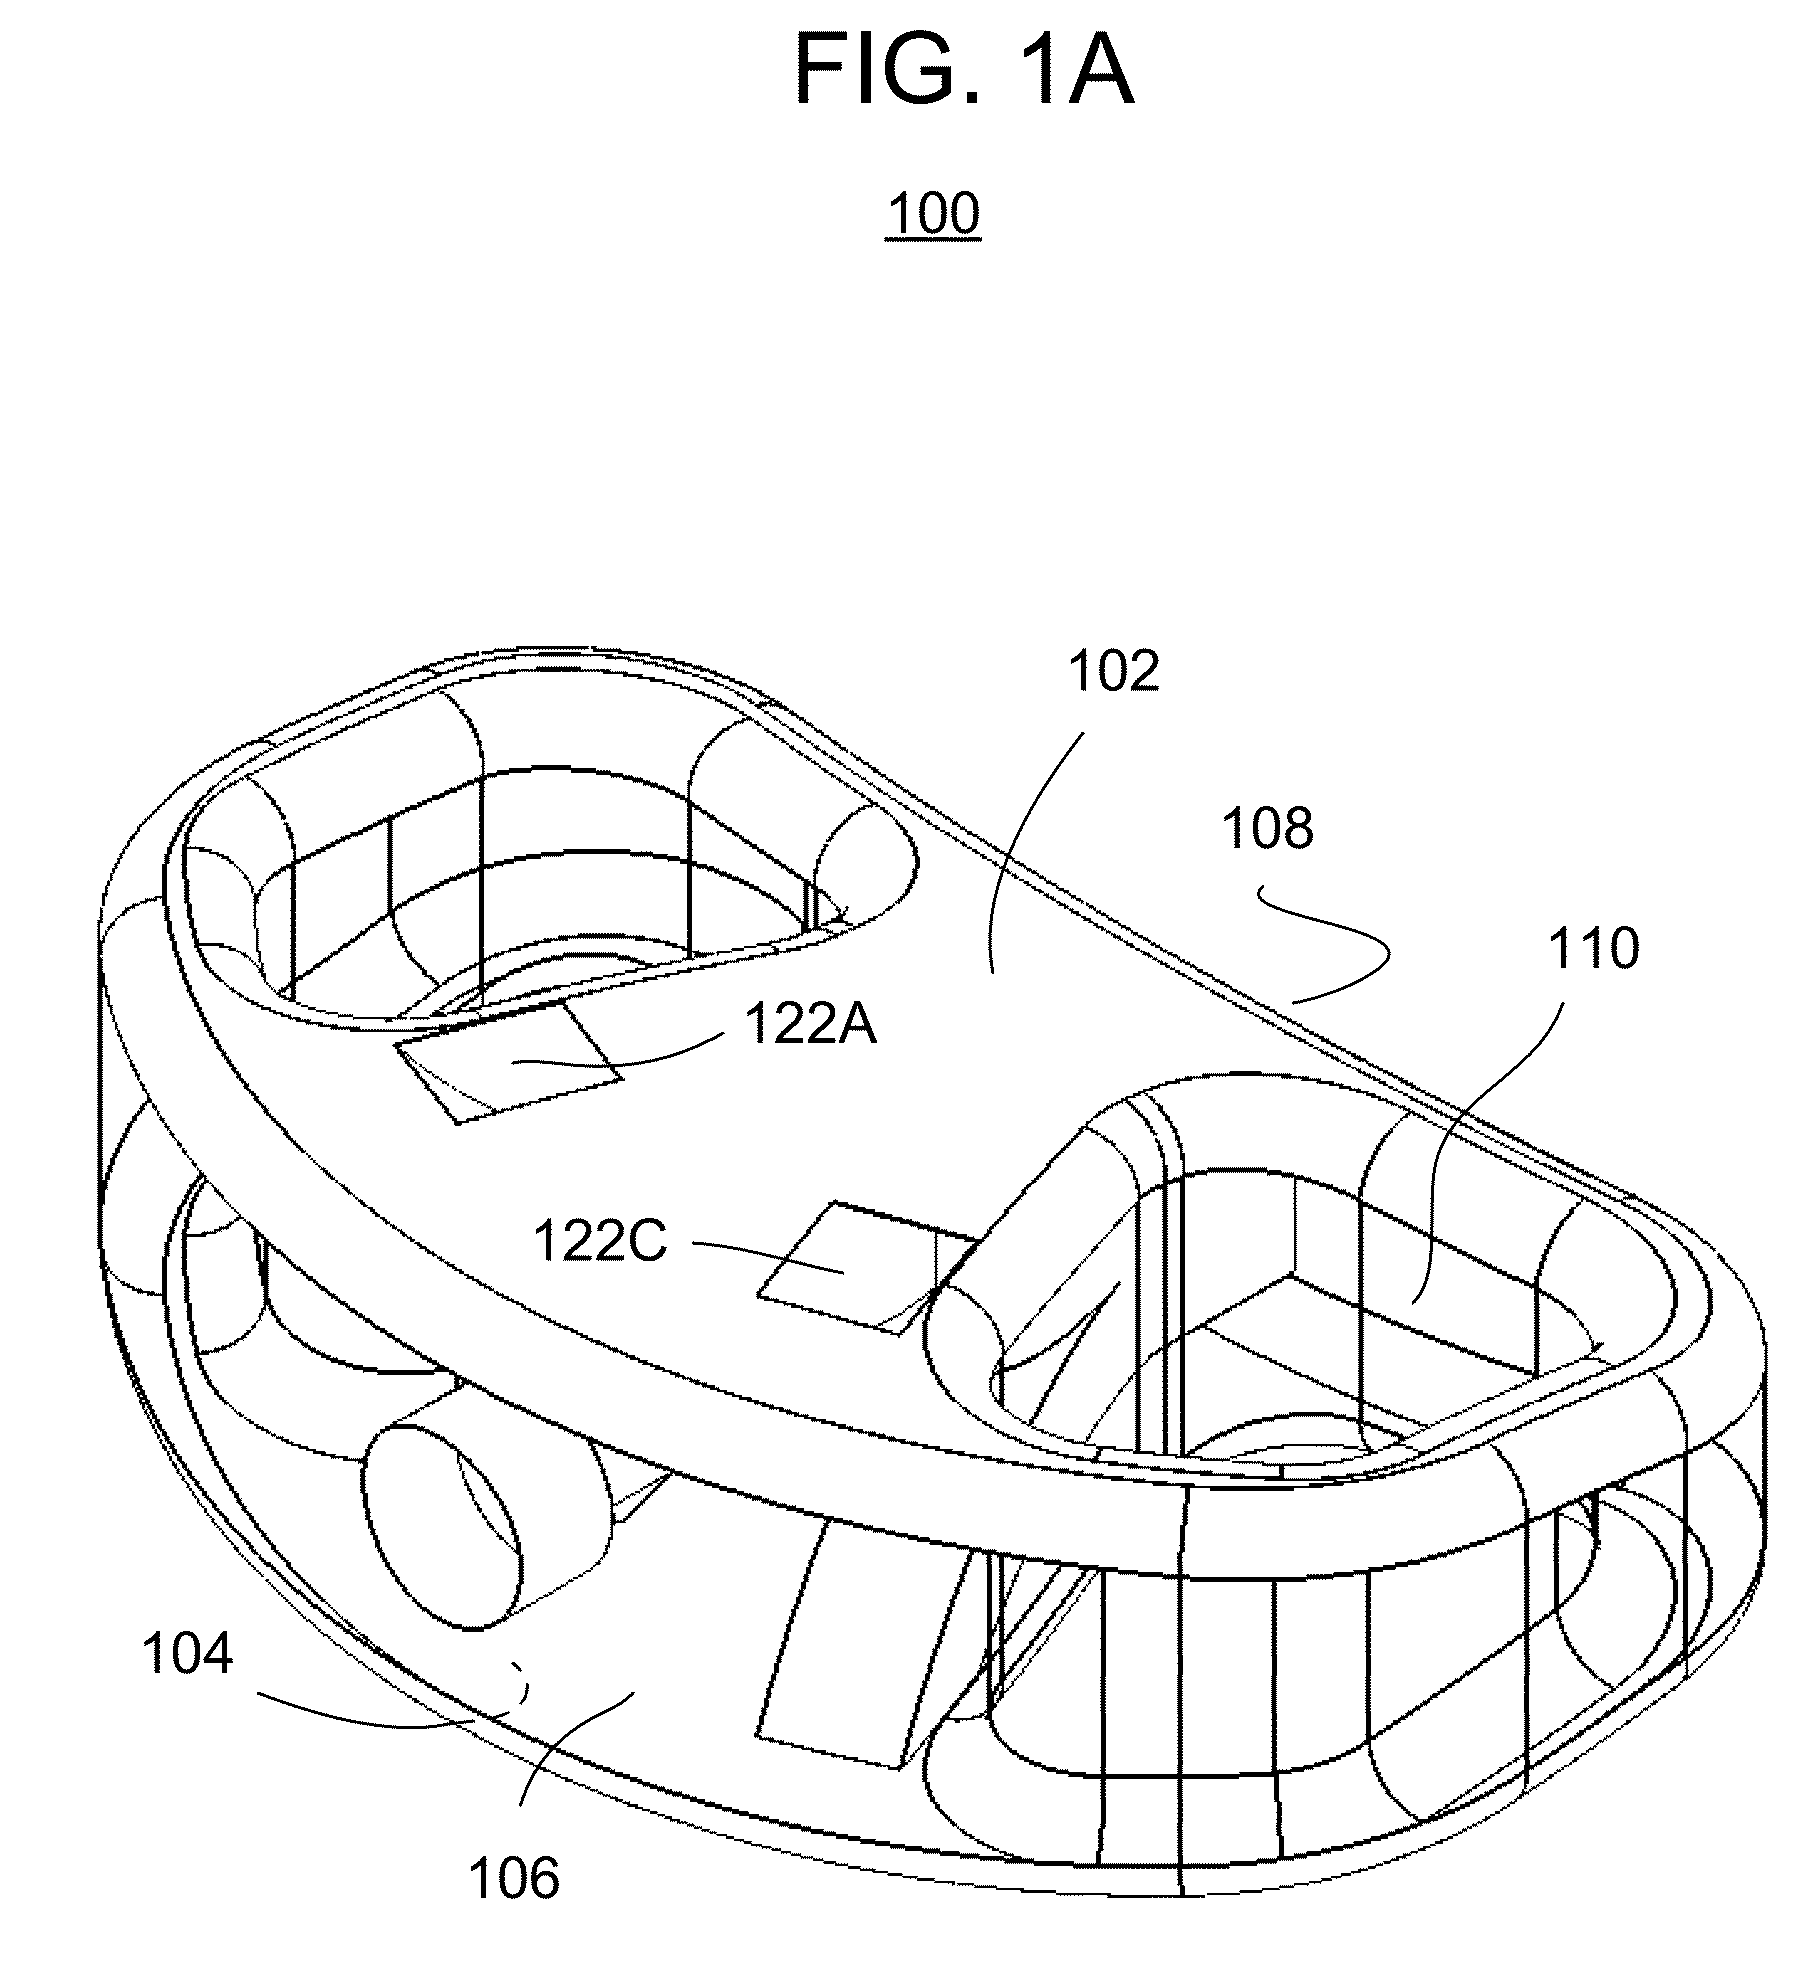 Interbody vertebral prosthetic and orthopedic fusion device with self-deploying anchors